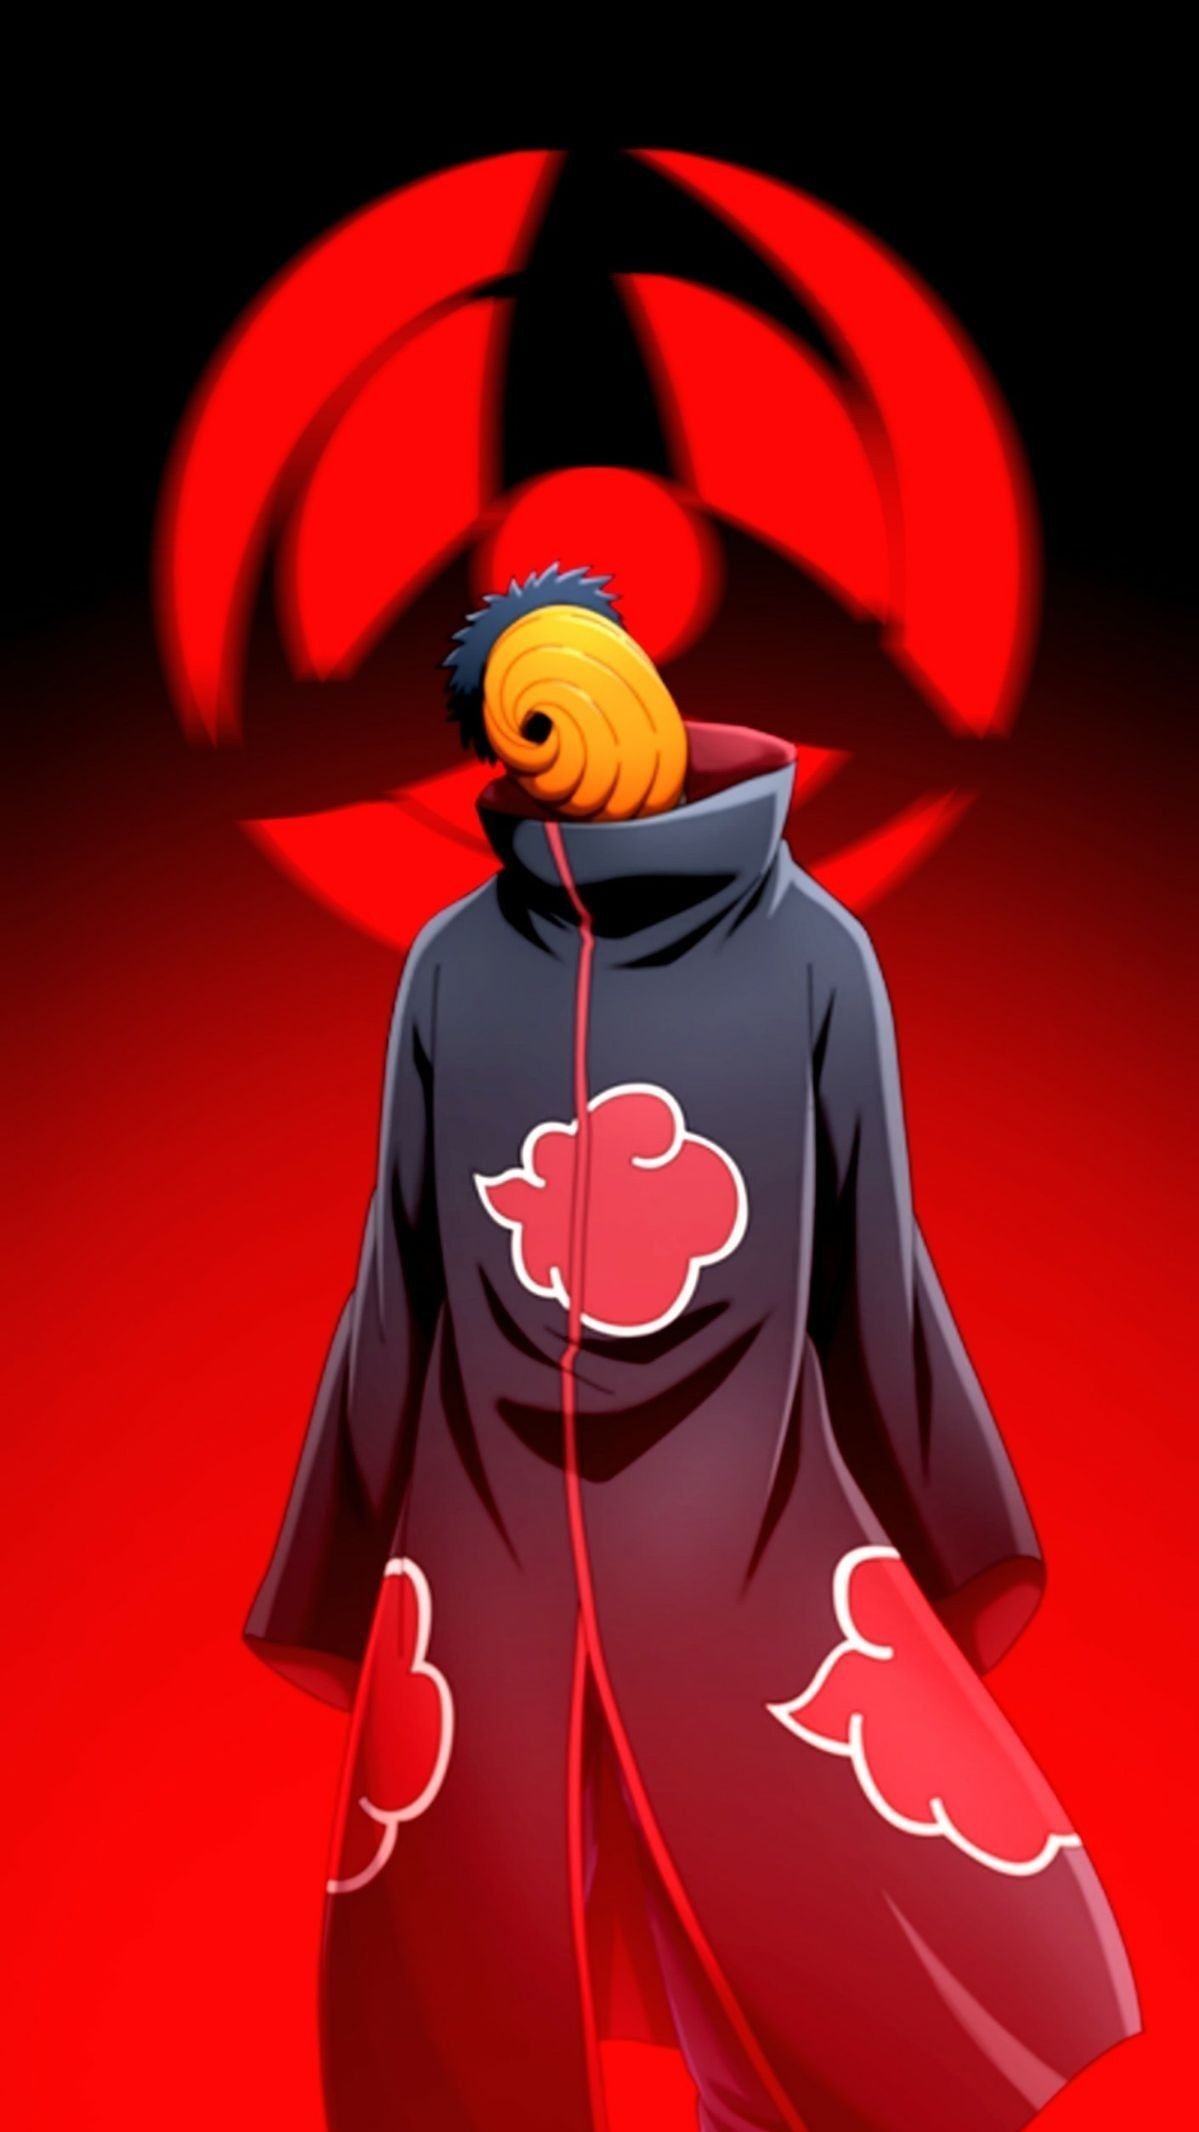 Obito wallpaper by Reizeiclub - Download on ZEDGE™ | d4bc-sgquangbinhtourist.com.vn